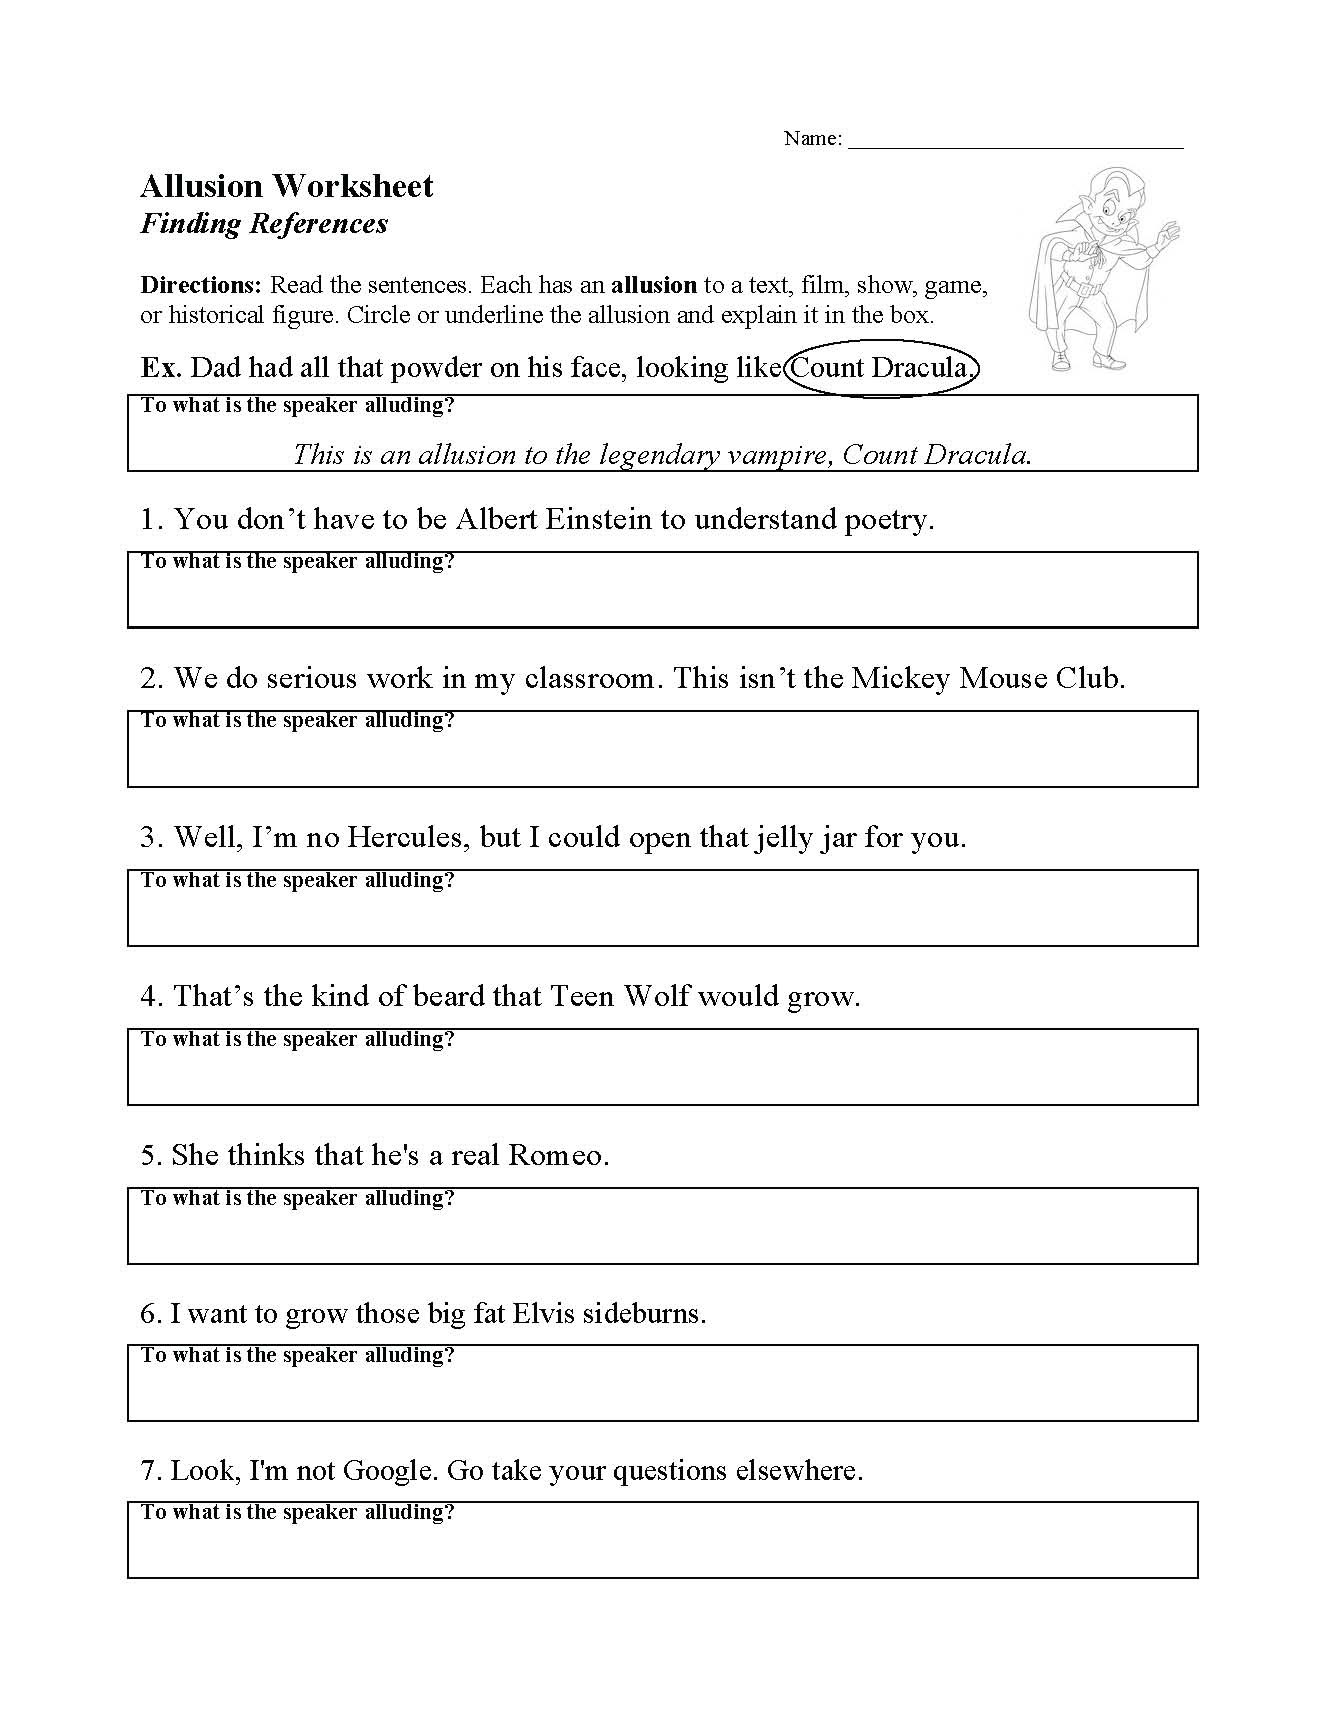 This is a preview image of our Allusion Worksheet. Click on it to enlarge or view the source file.